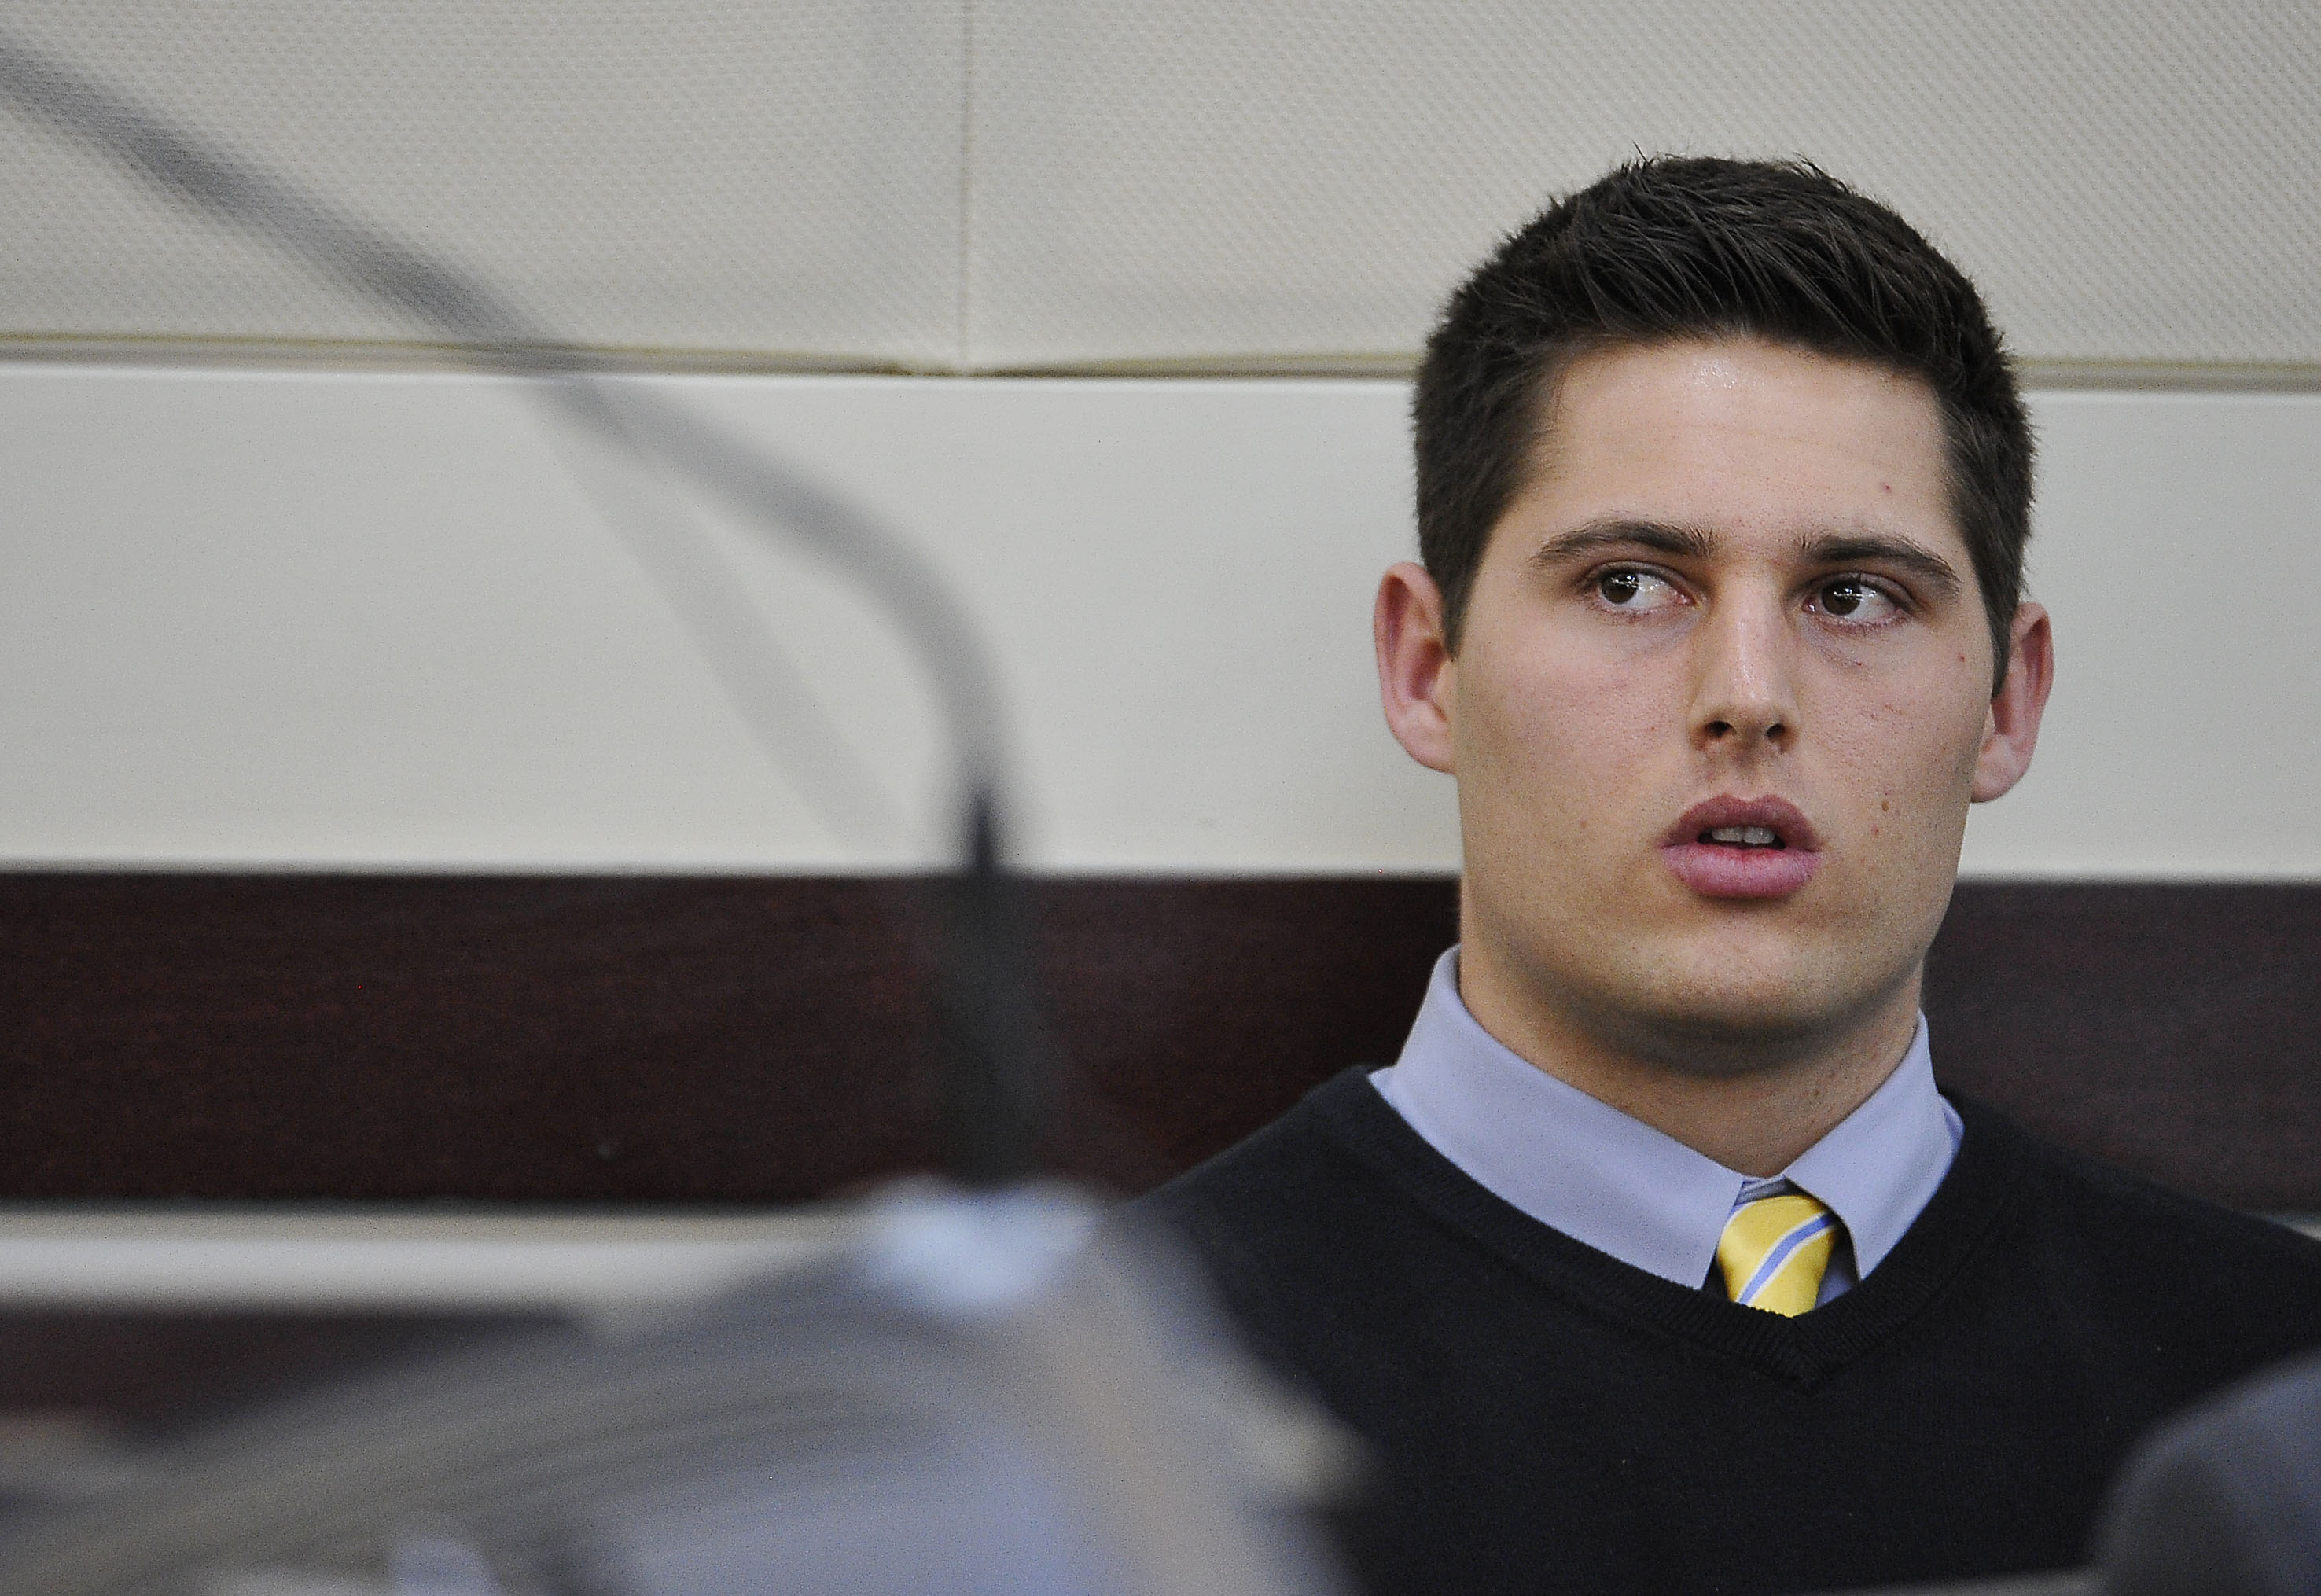 Defendant Brandon Vandenburg listens as his attorney Fletcher Long argues for acquittal during the his trial Monday, Jan. 26, 2015, in Nashville, Tenn. Tenn. Former Vanderbilt football players Vandenburg and Cory Batey are standing trial on five counts of aggravated rape and two counts of aggravated sexual battery. (AP Photo/Larry McCormack, Pool